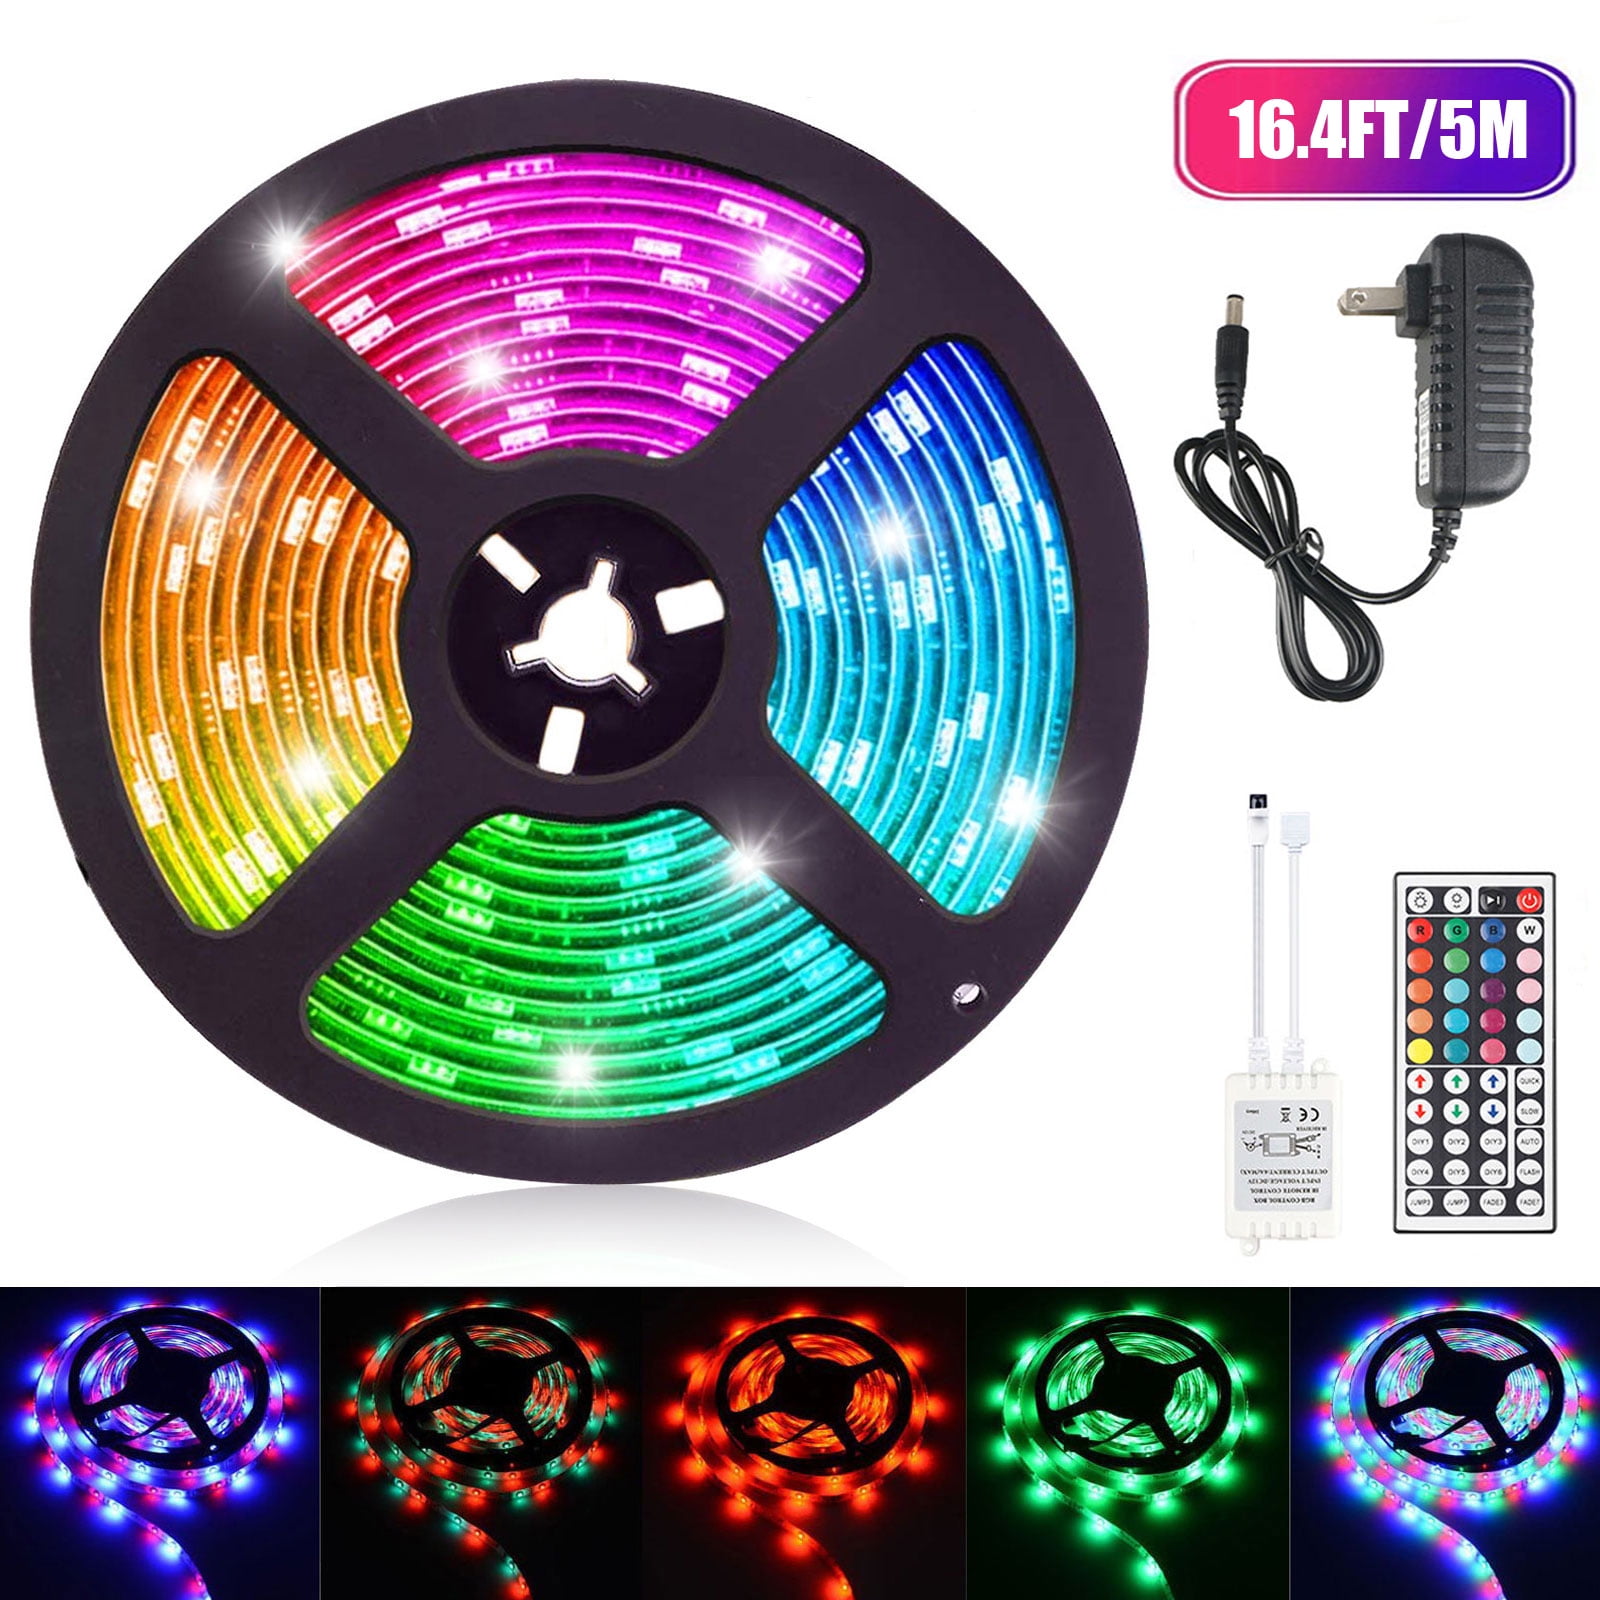 Details about   5M 16.4ft RGB Waterproof 300 LED 3528 SMD Flexible Strip Light 12V+Remote+Power 